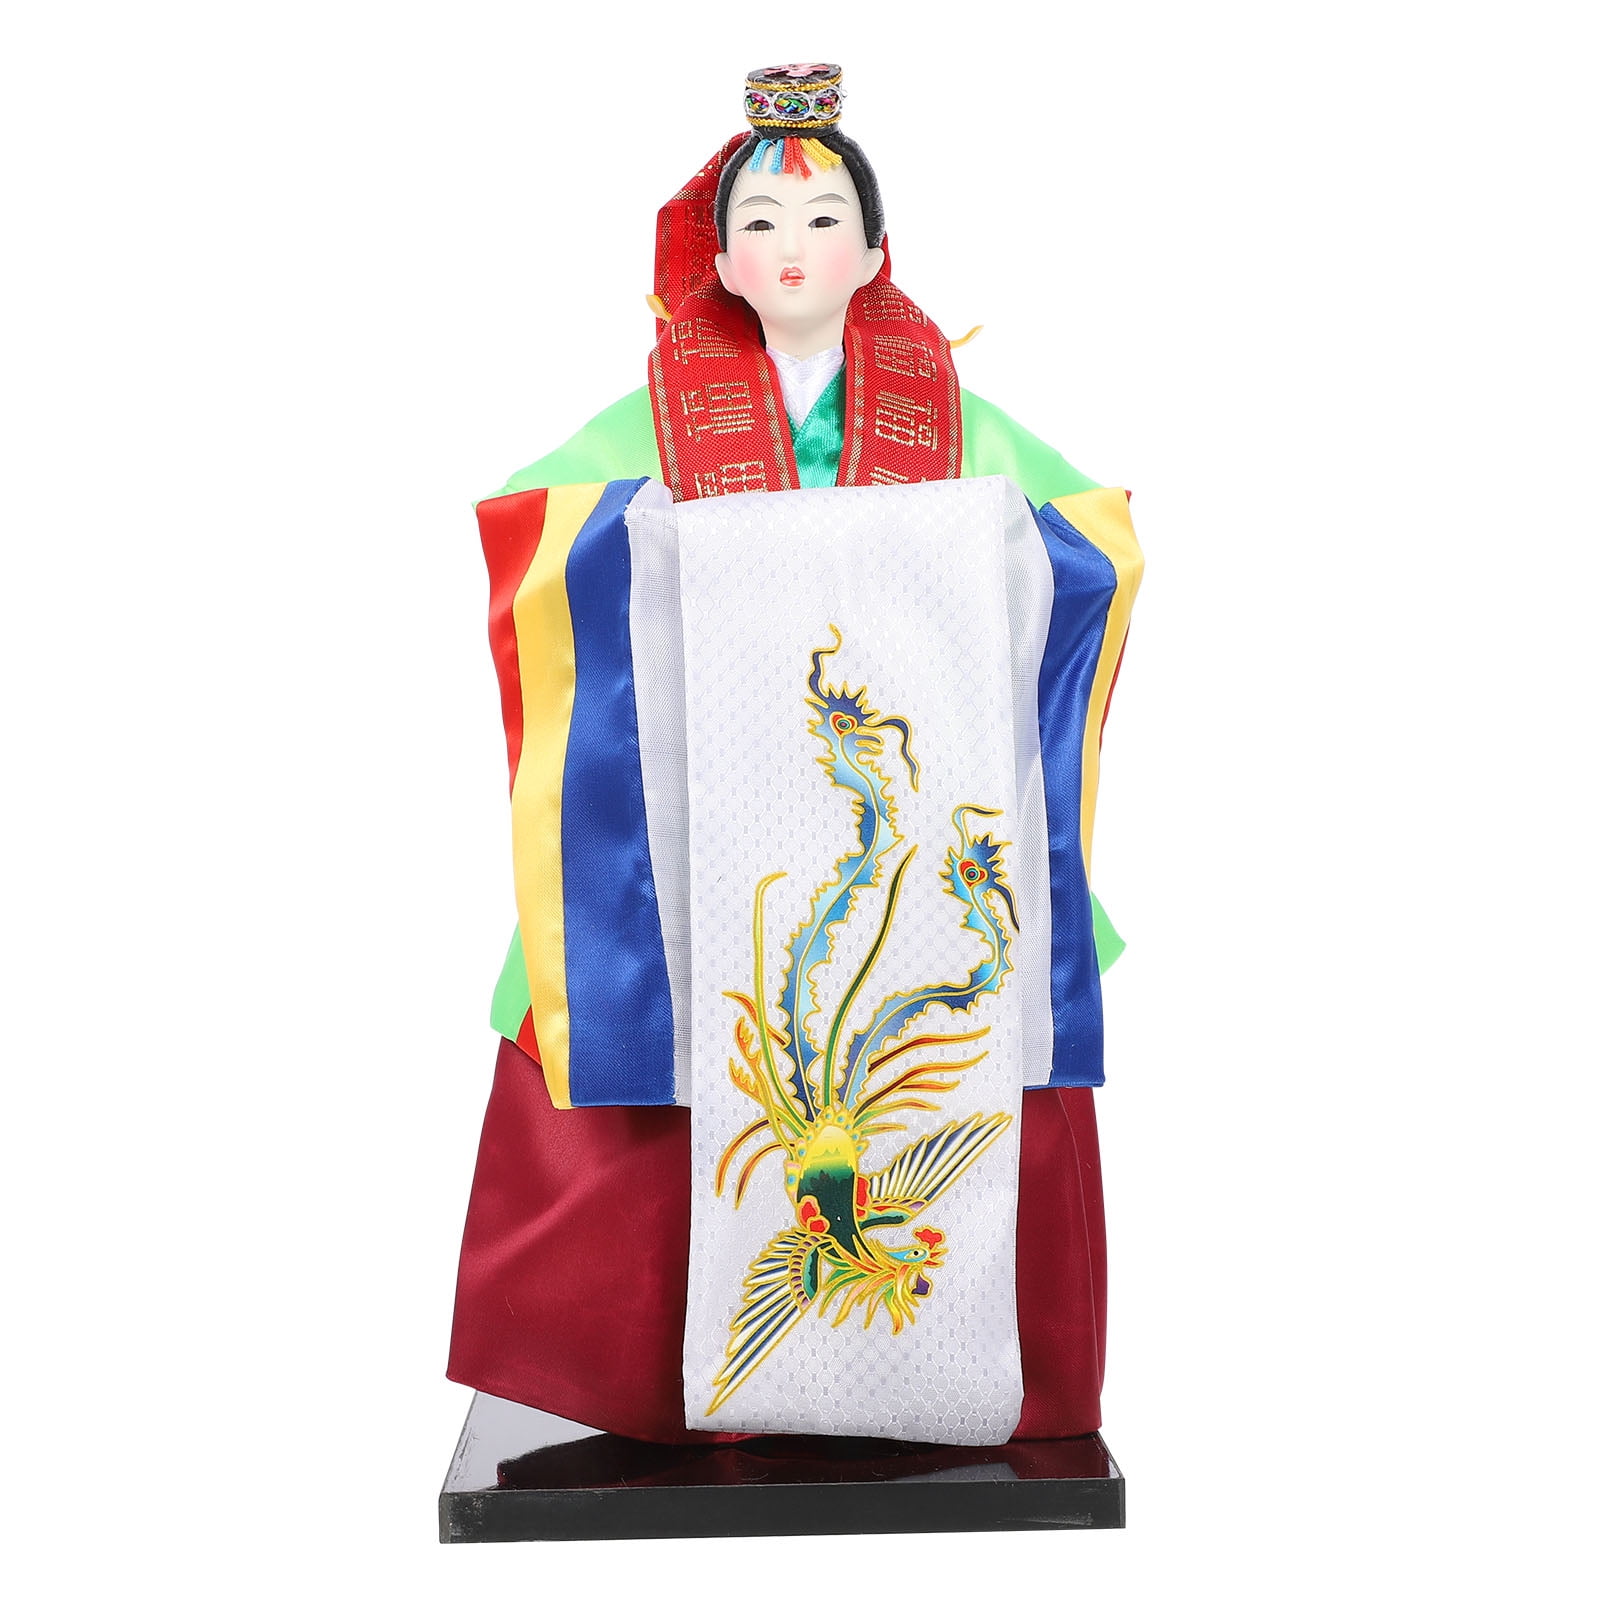 Totority Table top Decor Tabletop Decor Decorations for Home Korean Decor  Home Decorations Desk top Decor Hand Decor Desktop Decor Korean Hanbok Doll